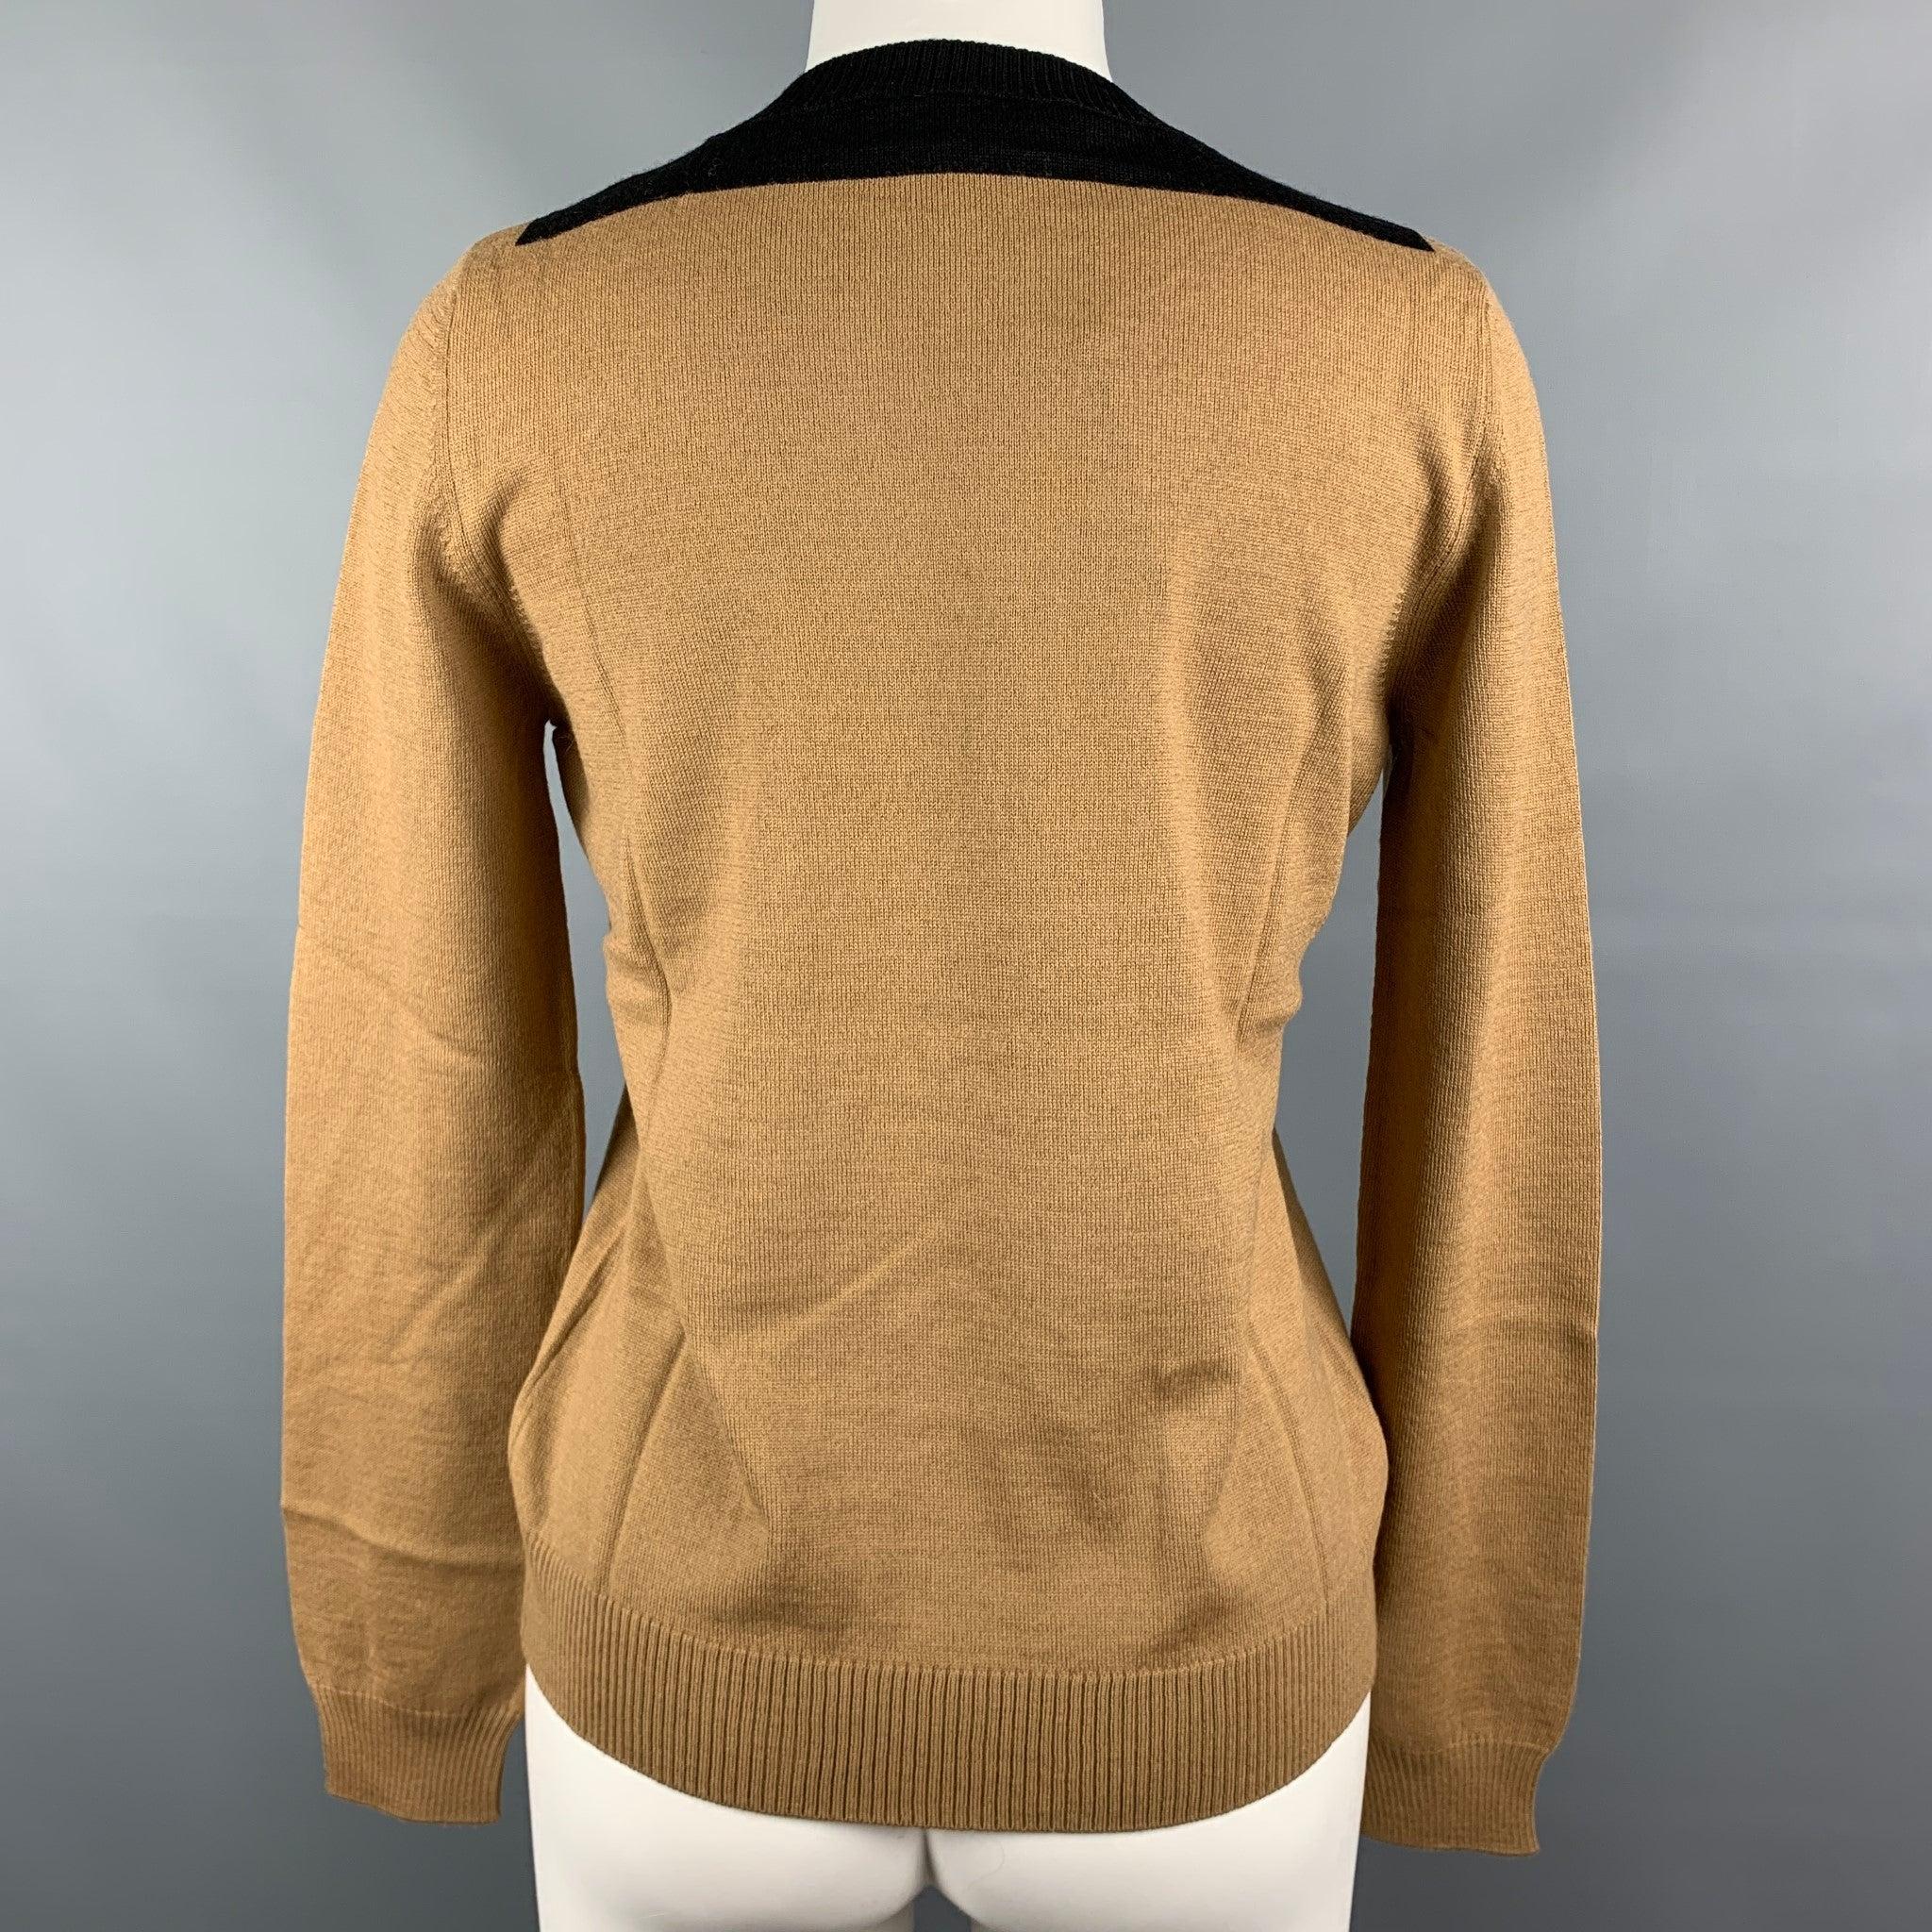 LOVE MOSCHINO Size 6 Beige Wool/Acrylic Color Block Front Pockets Pullover In Excellent Condition For Sale In San Francisco, CA